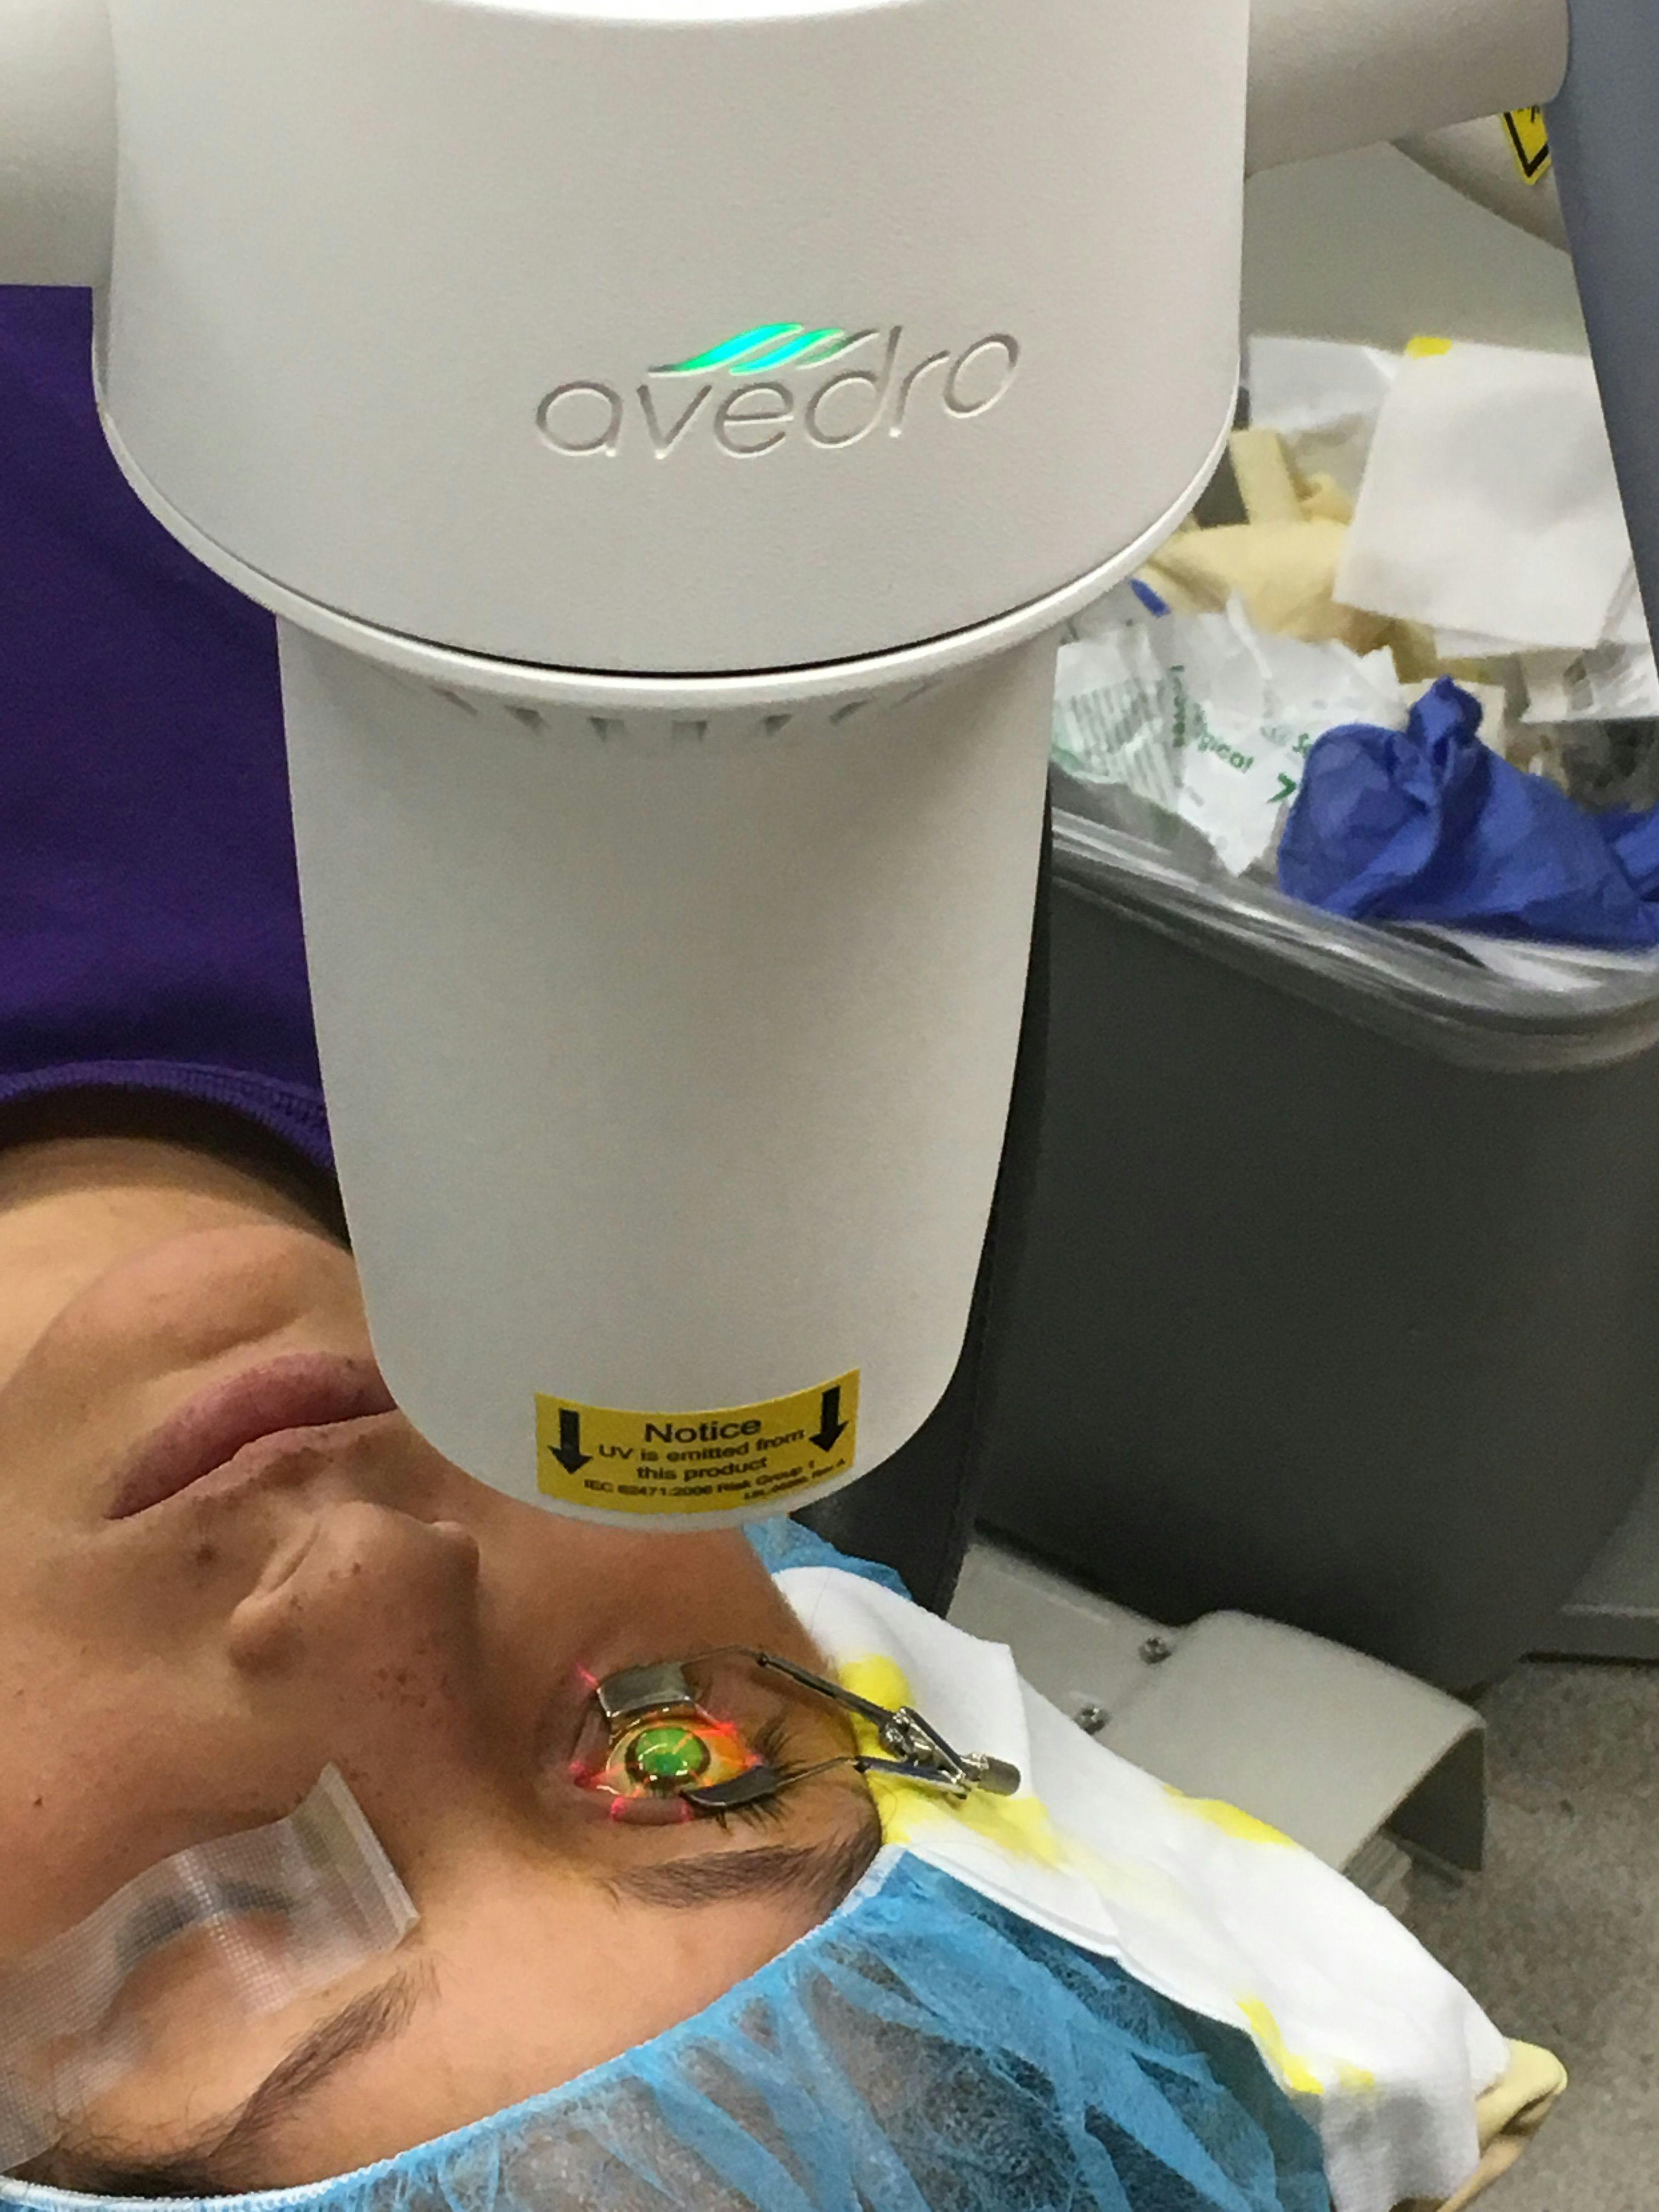 Patient receives CXL treatment (Image courtesy of Avedro).